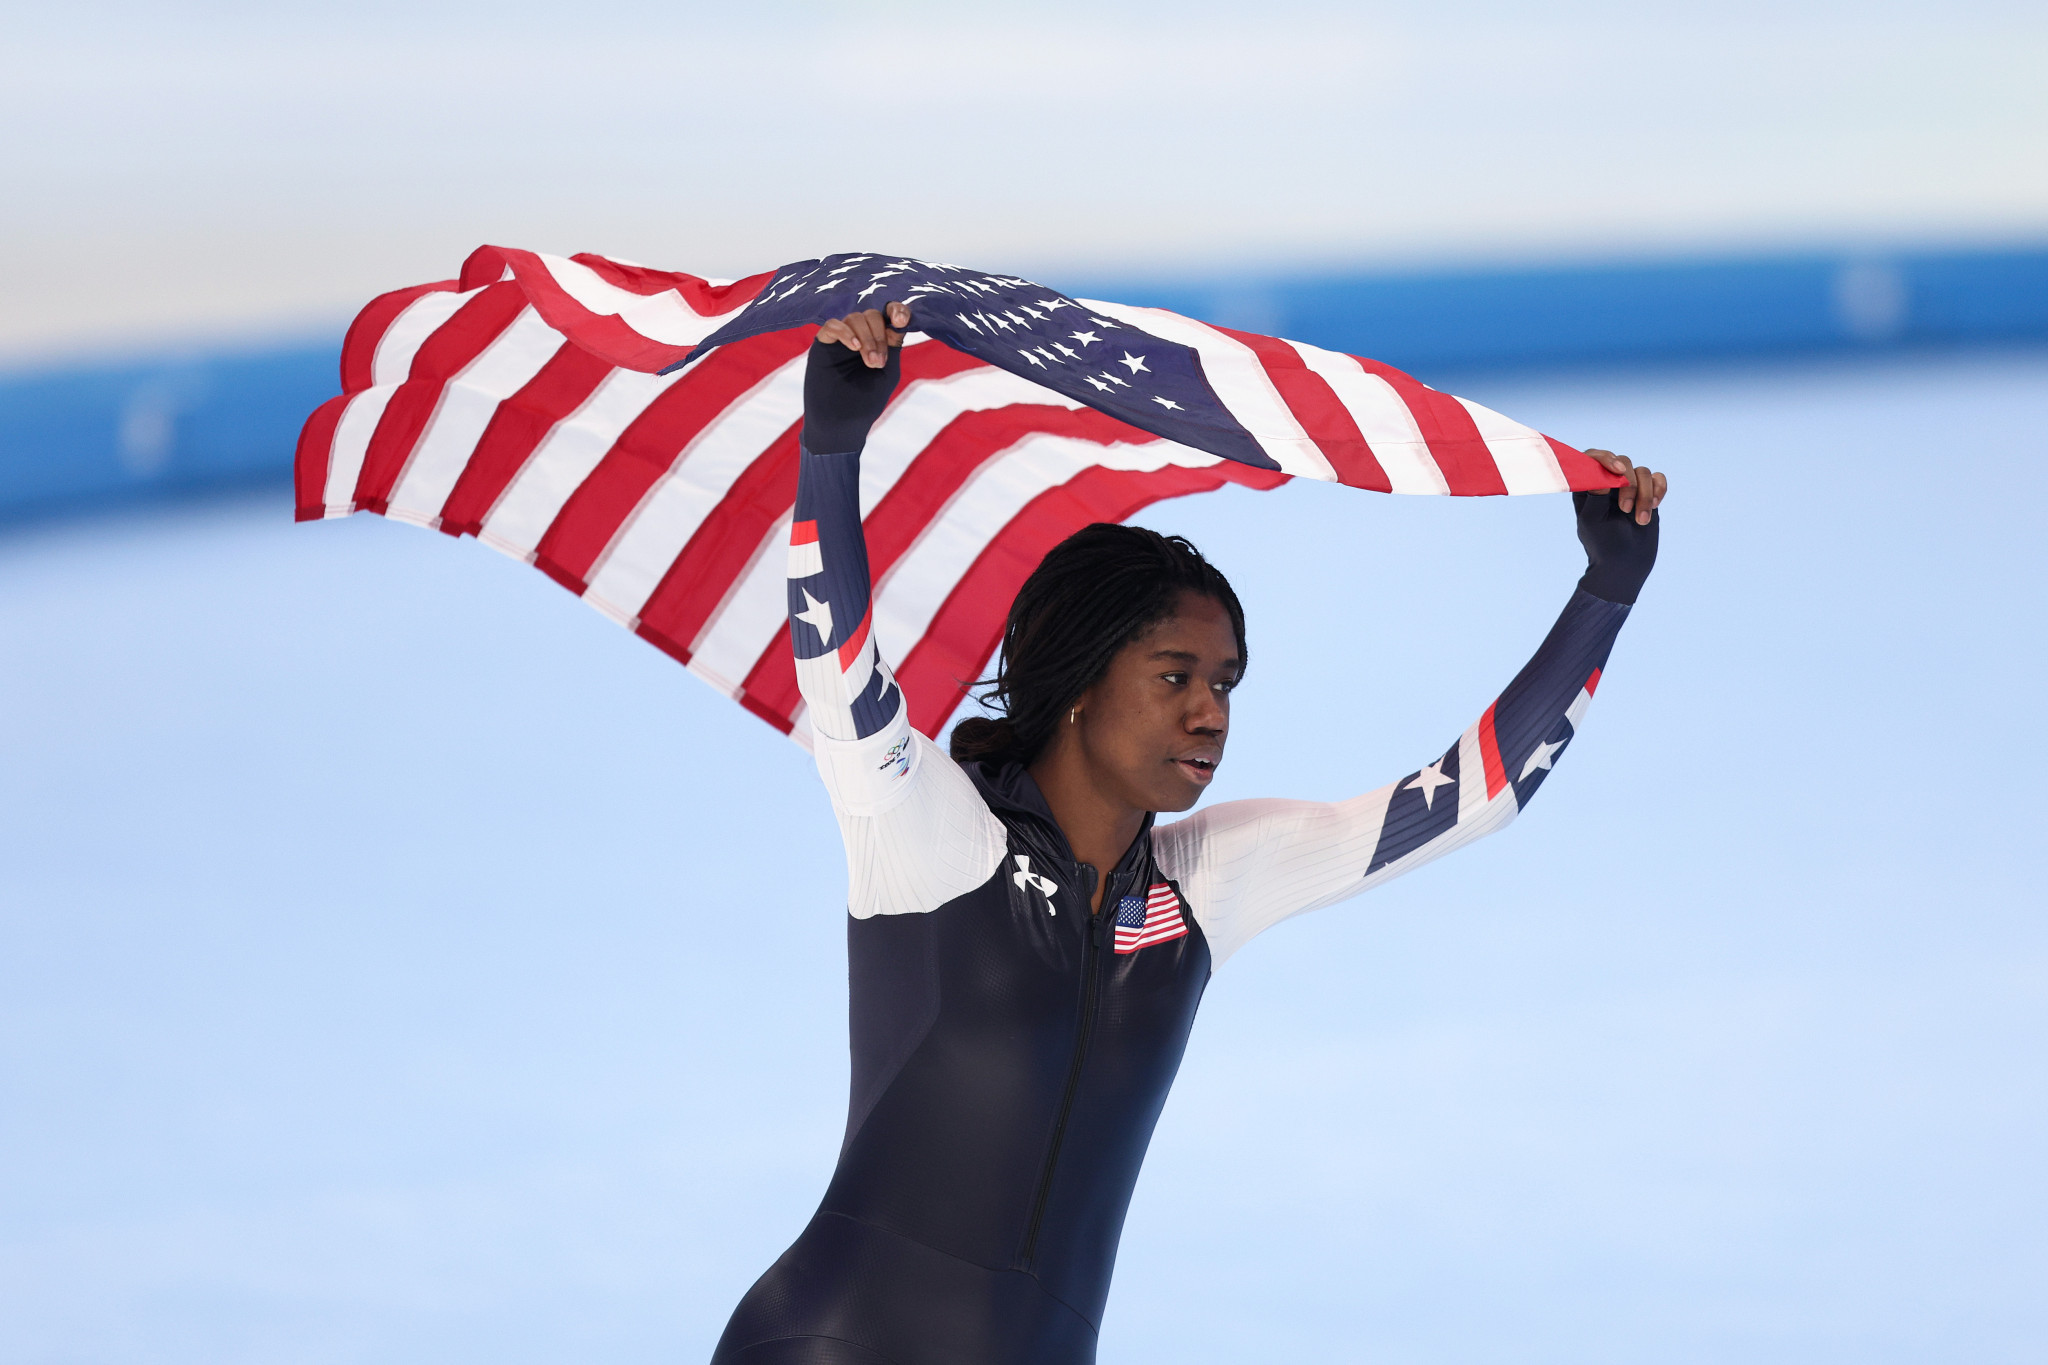  Reprieved Jackson seizes gold in speed in new miracle on ice at Beijing 2022